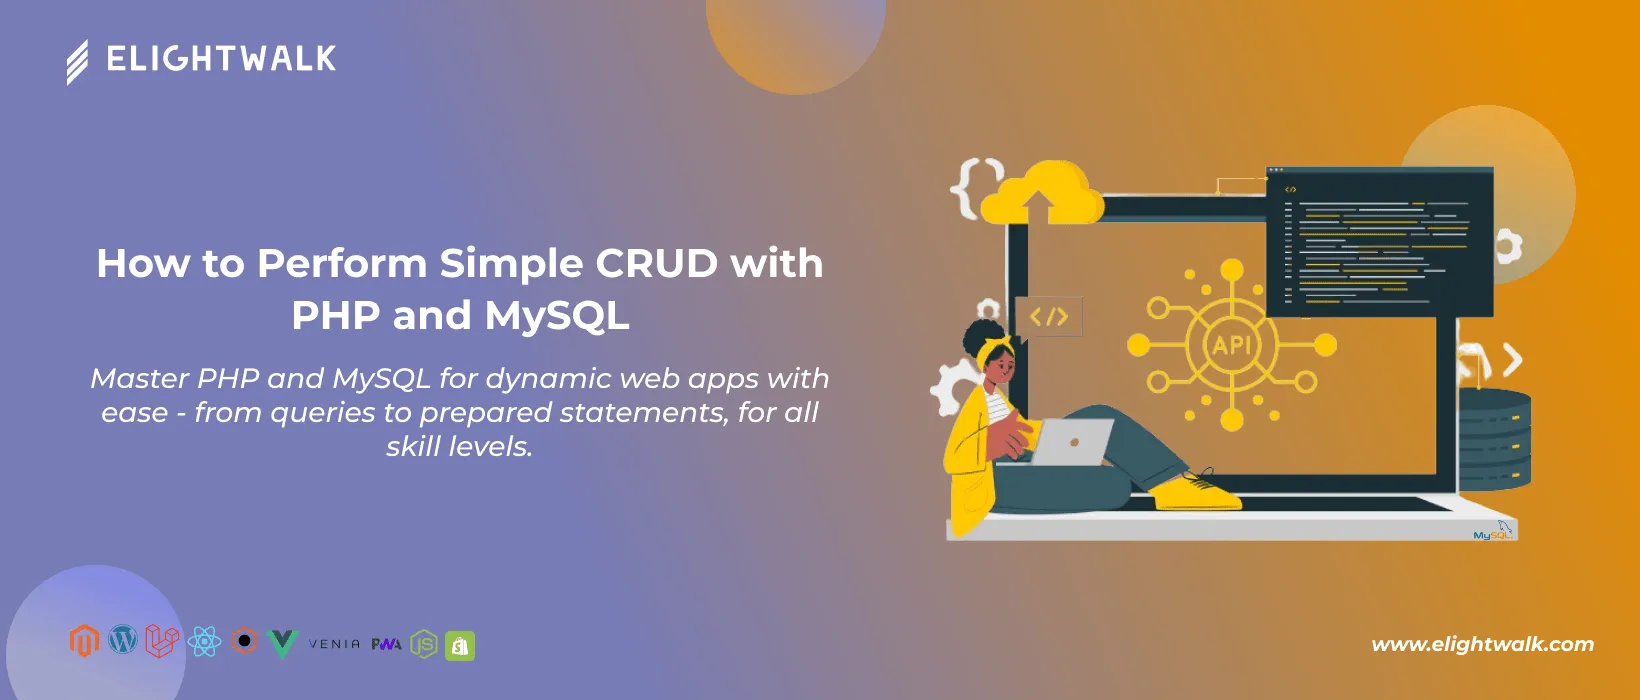 how to perform curd with PHP and MySQL